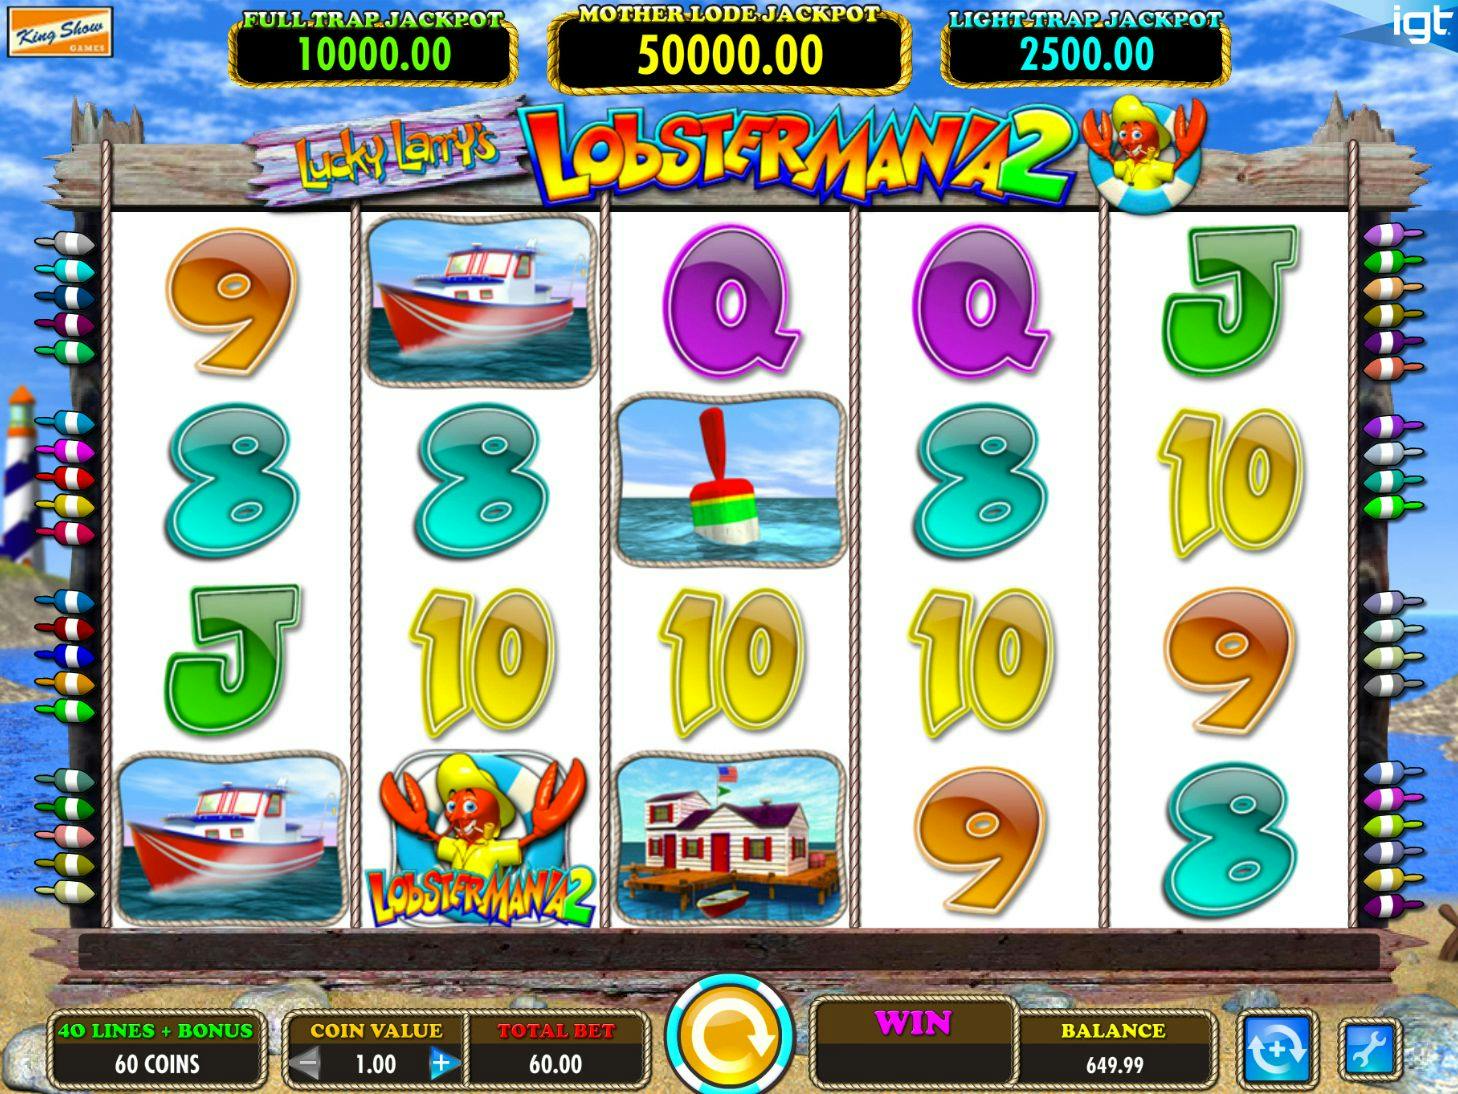 Lucky Larry's Lobstermania 2 slot review, payouts, and bonus | youbet.com